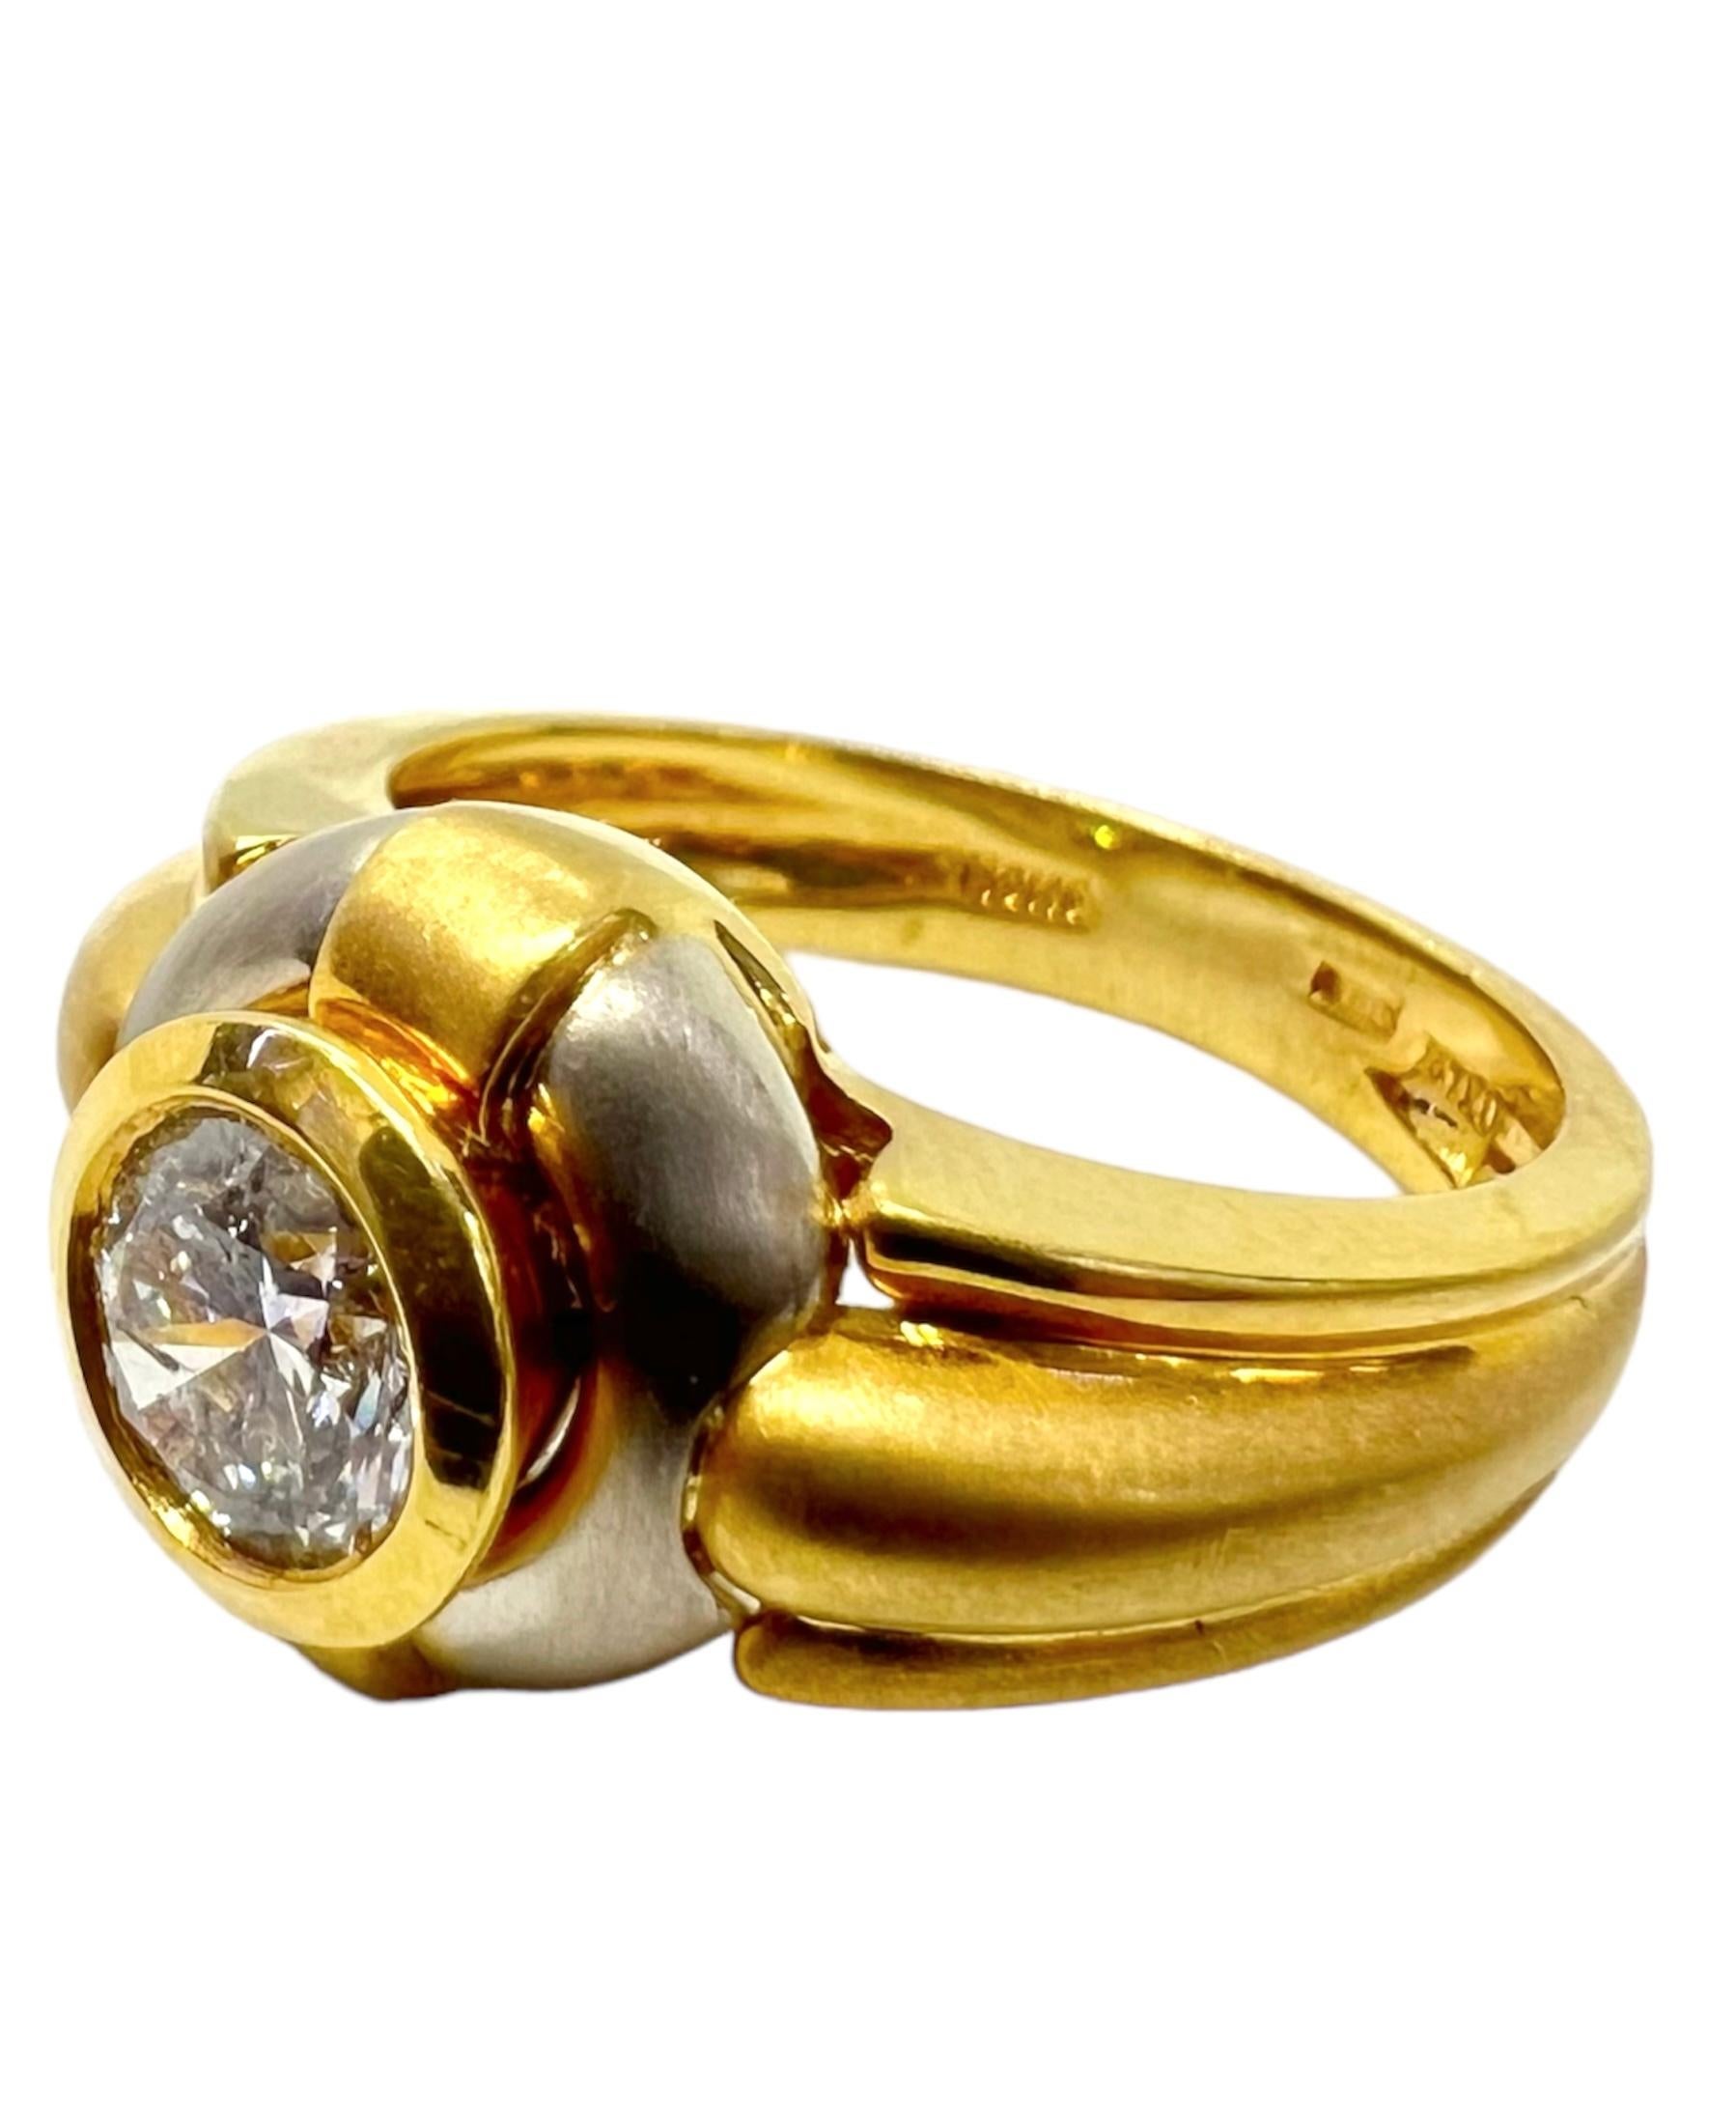 18K yellow gold ring with round center diamond.

Sophia D by Joseph Dardashti LTD has been known worldwide for 35 years and are inspired by classic Art Deco design that merges with modern manufacturing techniques.  